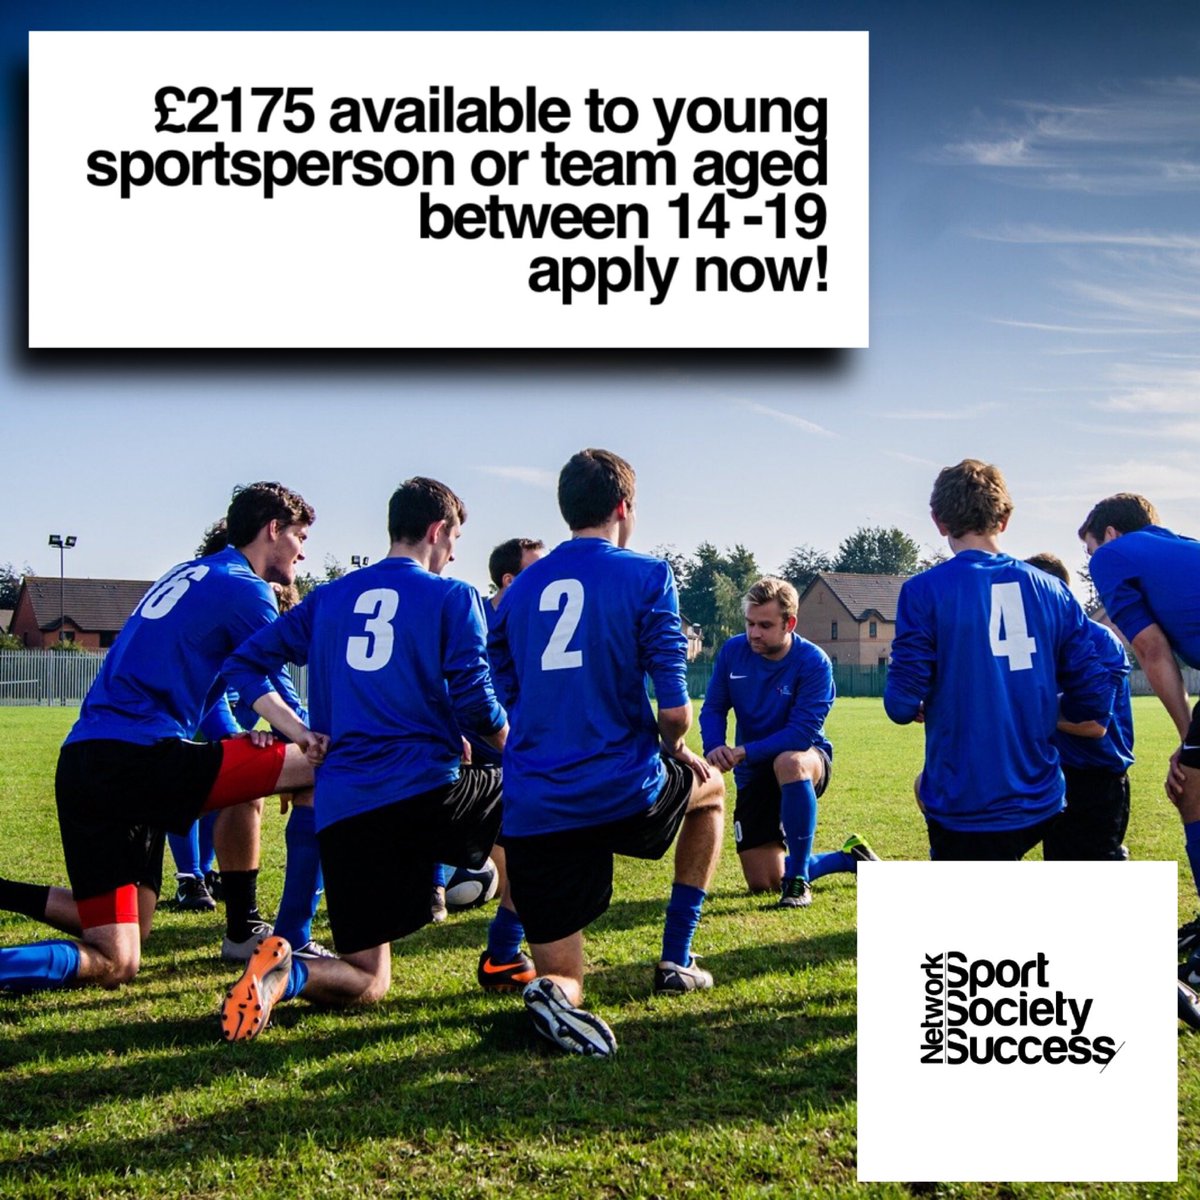 The deadline is 01.04.20! Don’t miss out! #bursary #sssnetwork #sports #fightforgood #sportsocietysuccessnetwork #sportsfunding #youthsports #bursarydeadline #lastchance